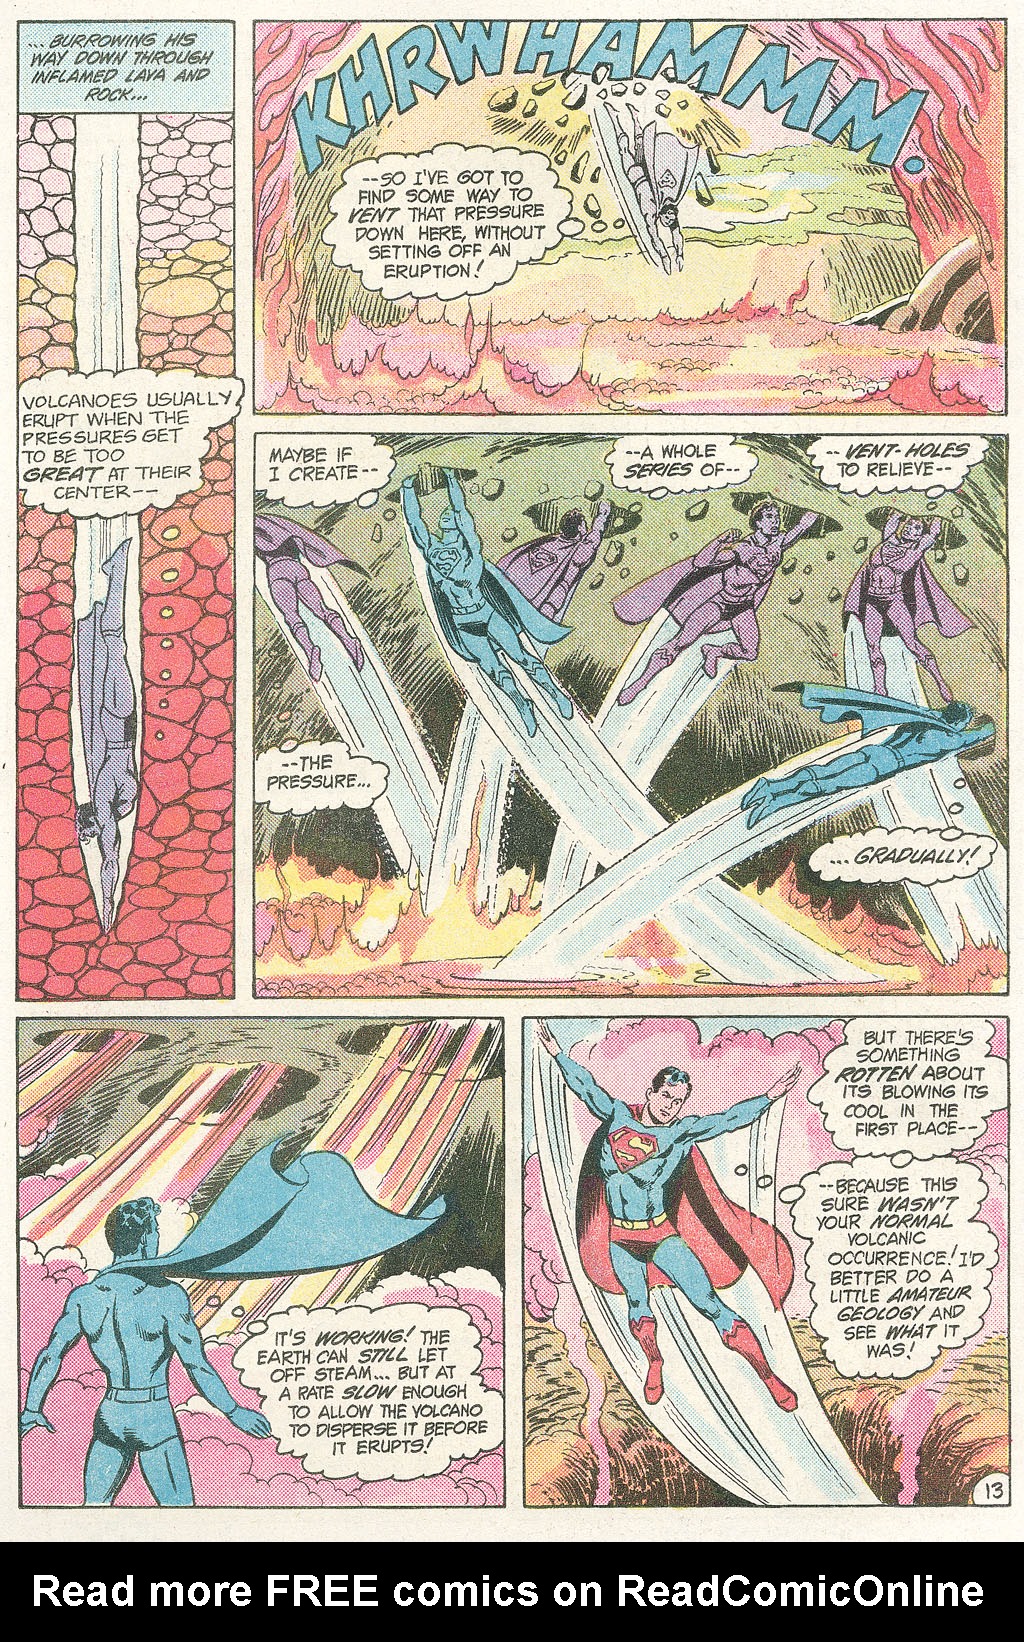 The New Adventures of Superboy 54 Page 17